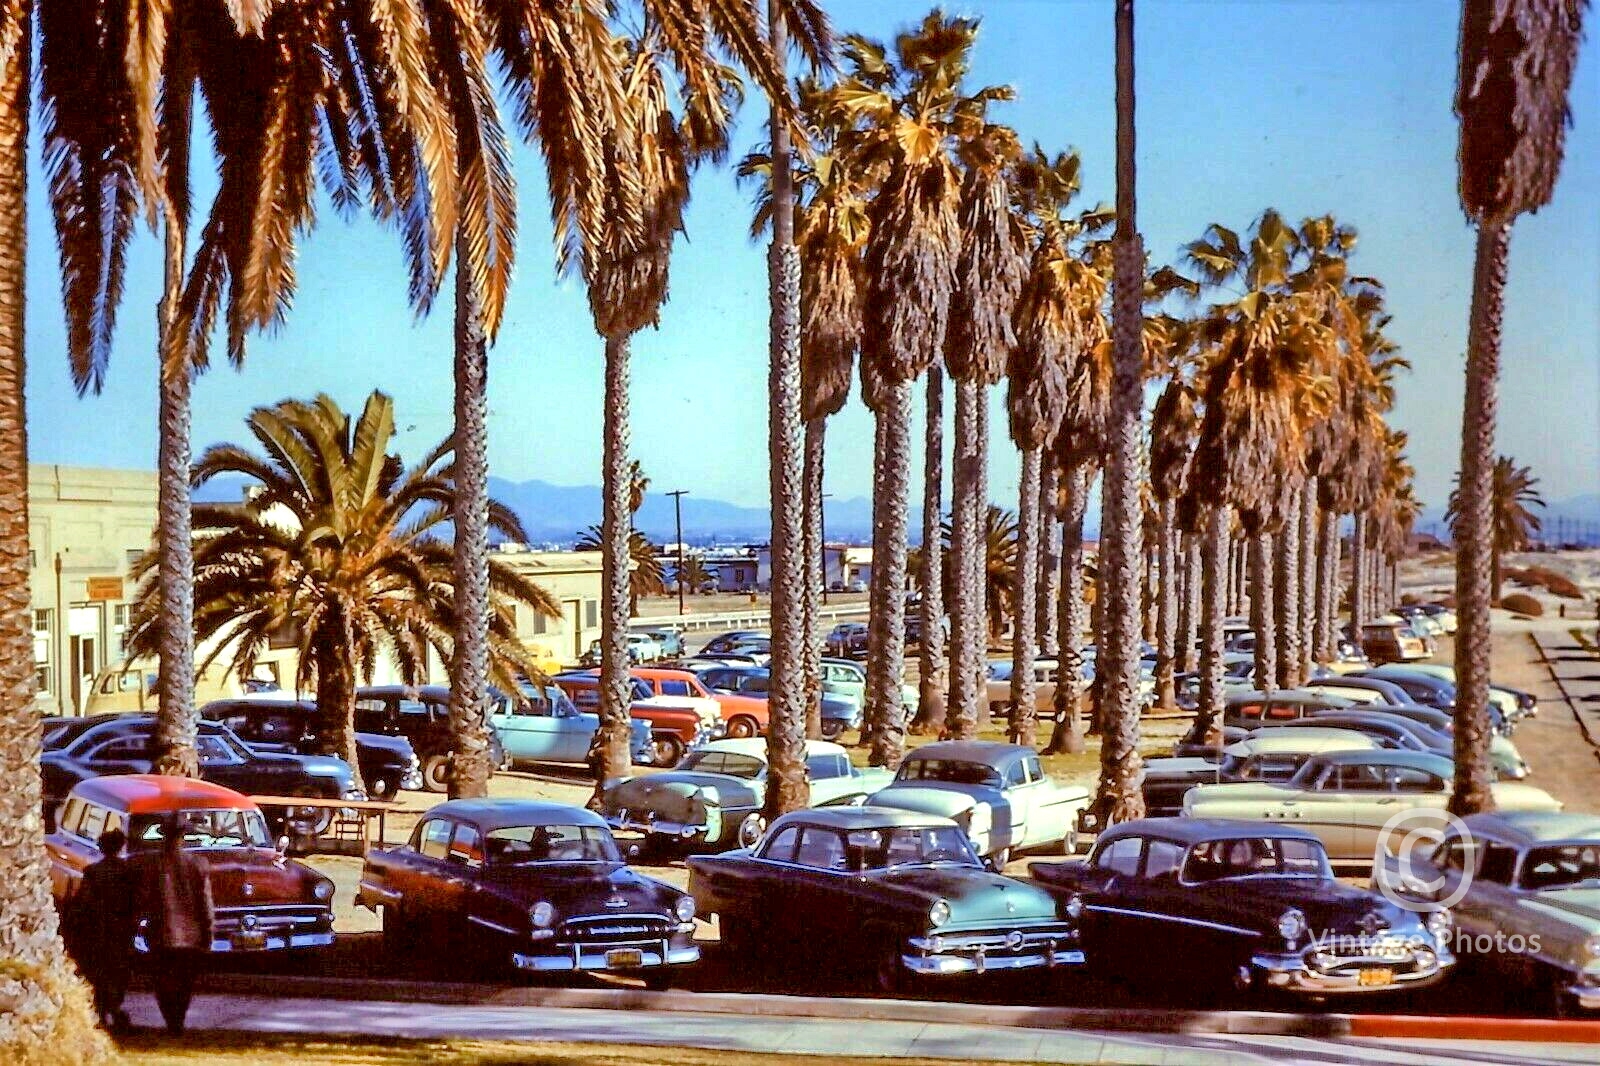 1950s American Classic Automobiles parked under Palm Trees